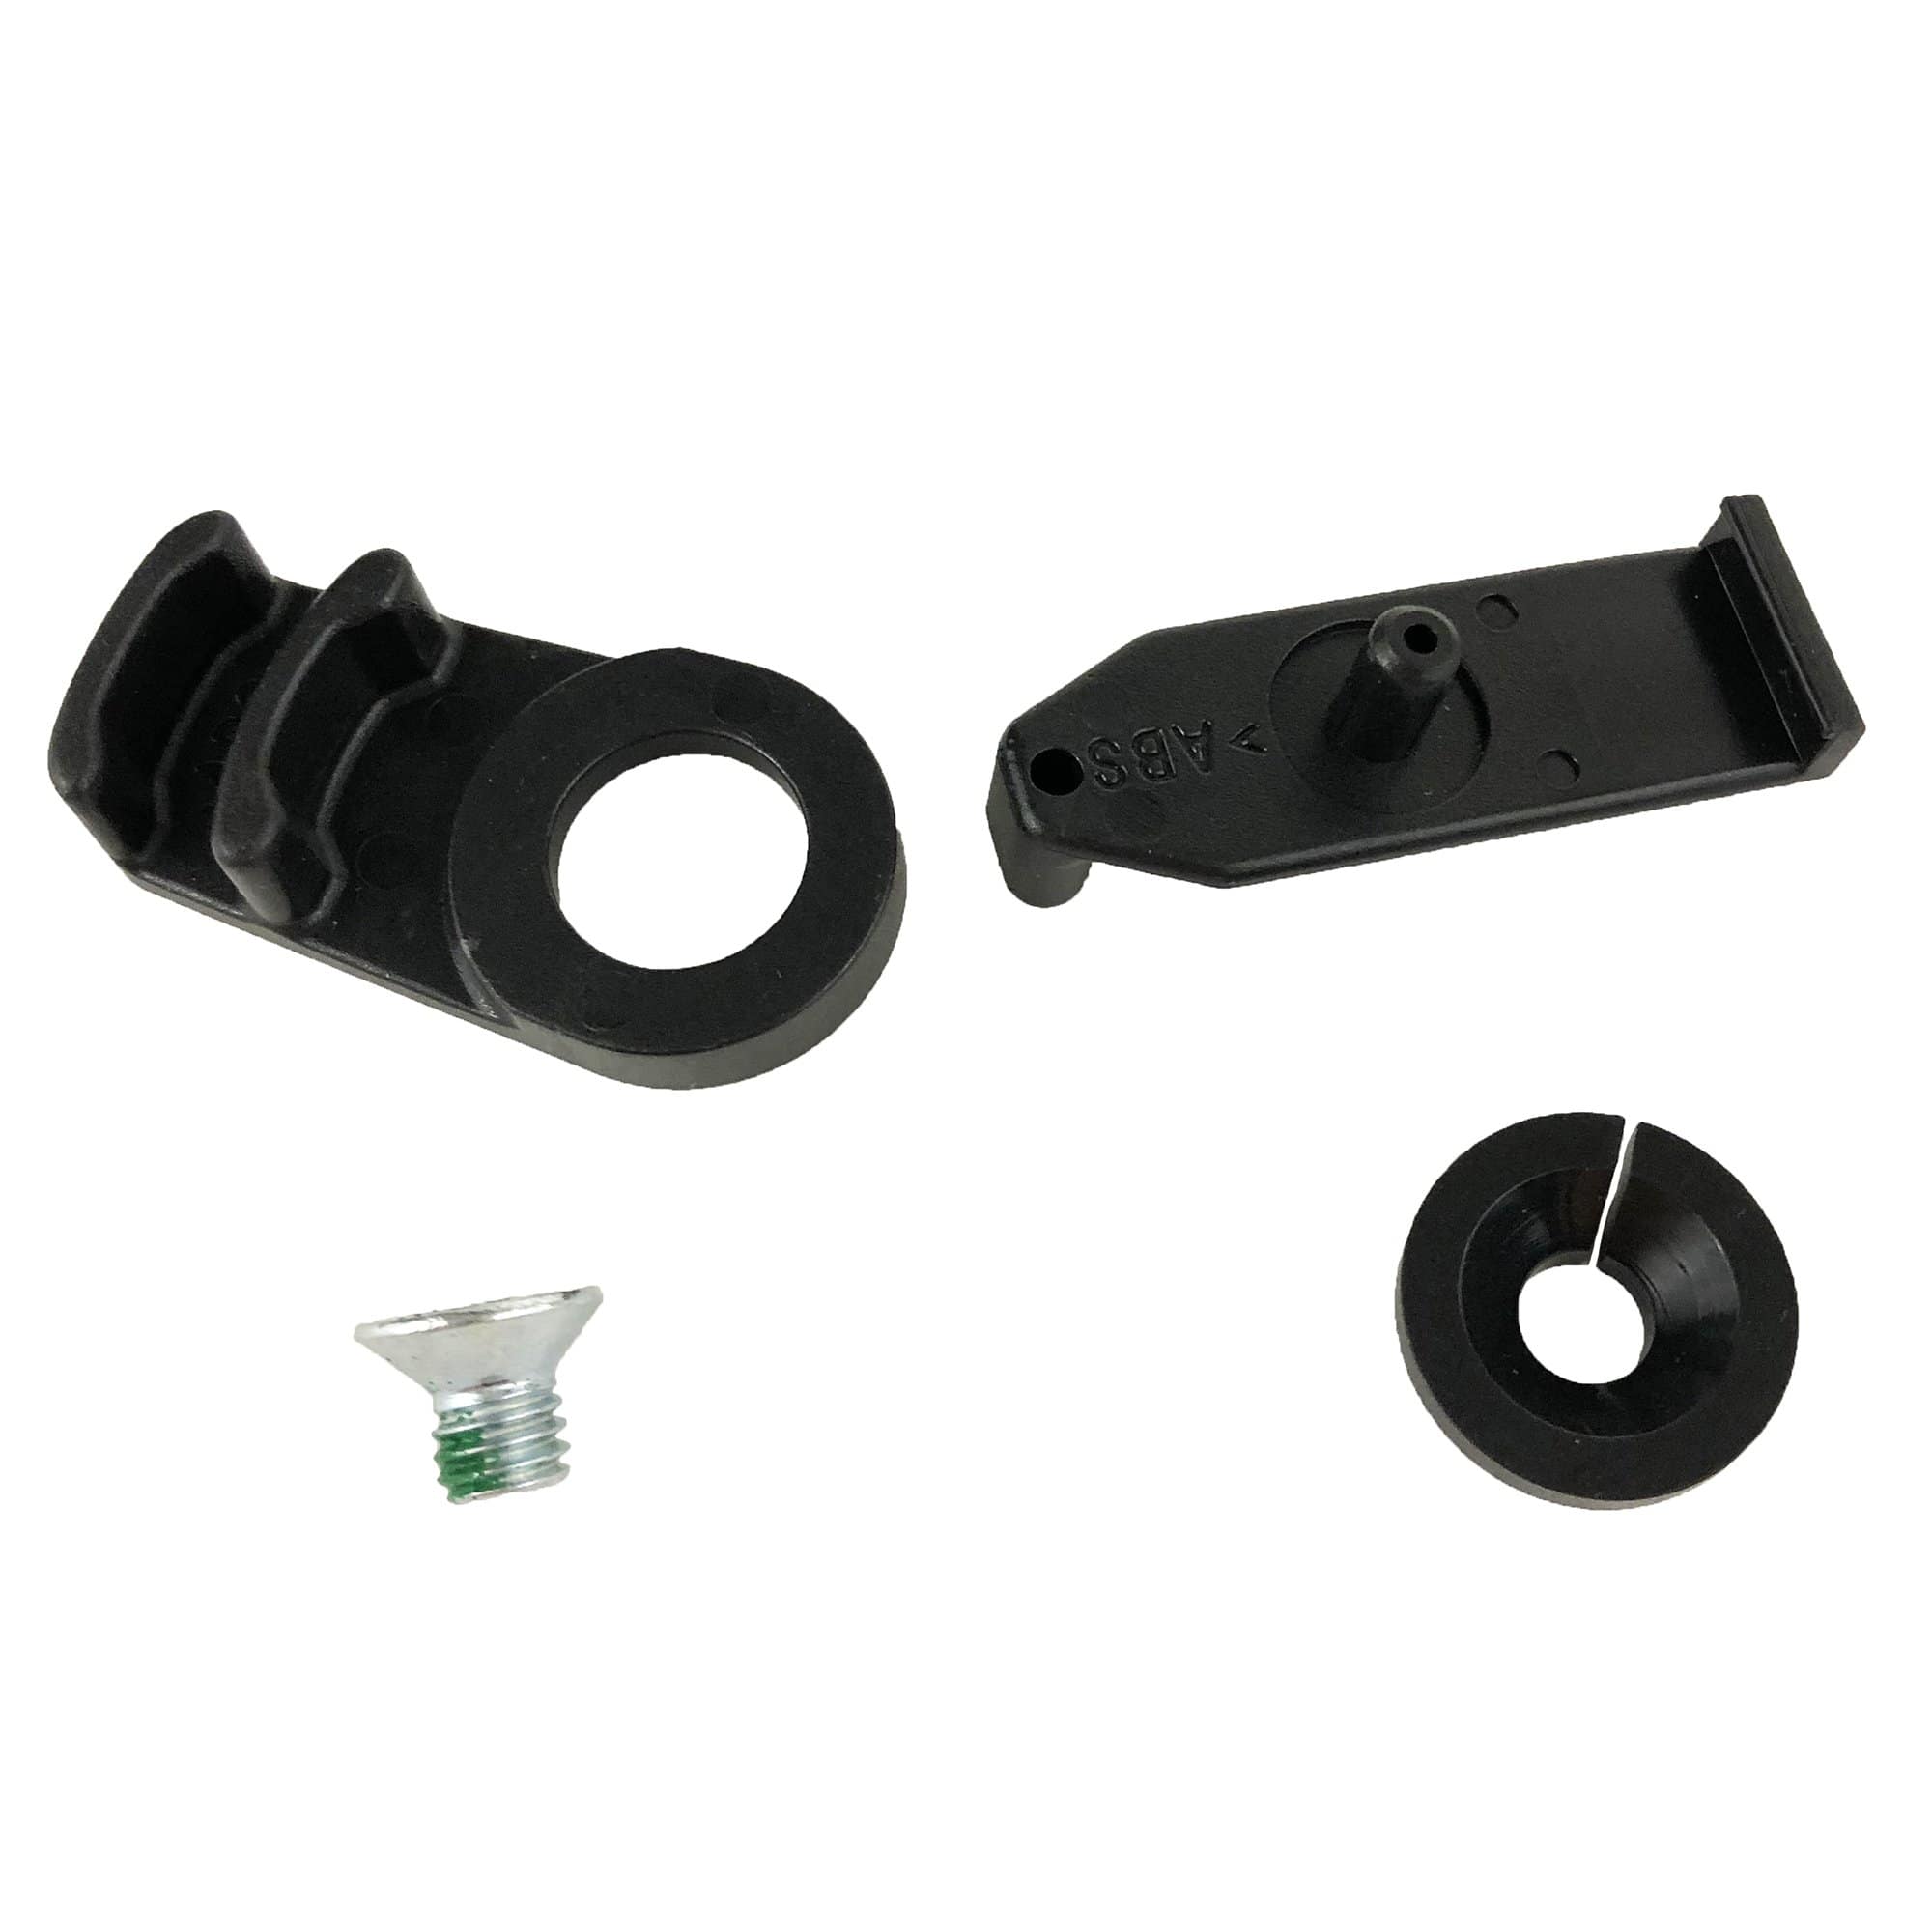 Dometic 2952140172 RM4223 Refrigerator Door Lock Complete Assembly Kit, Black